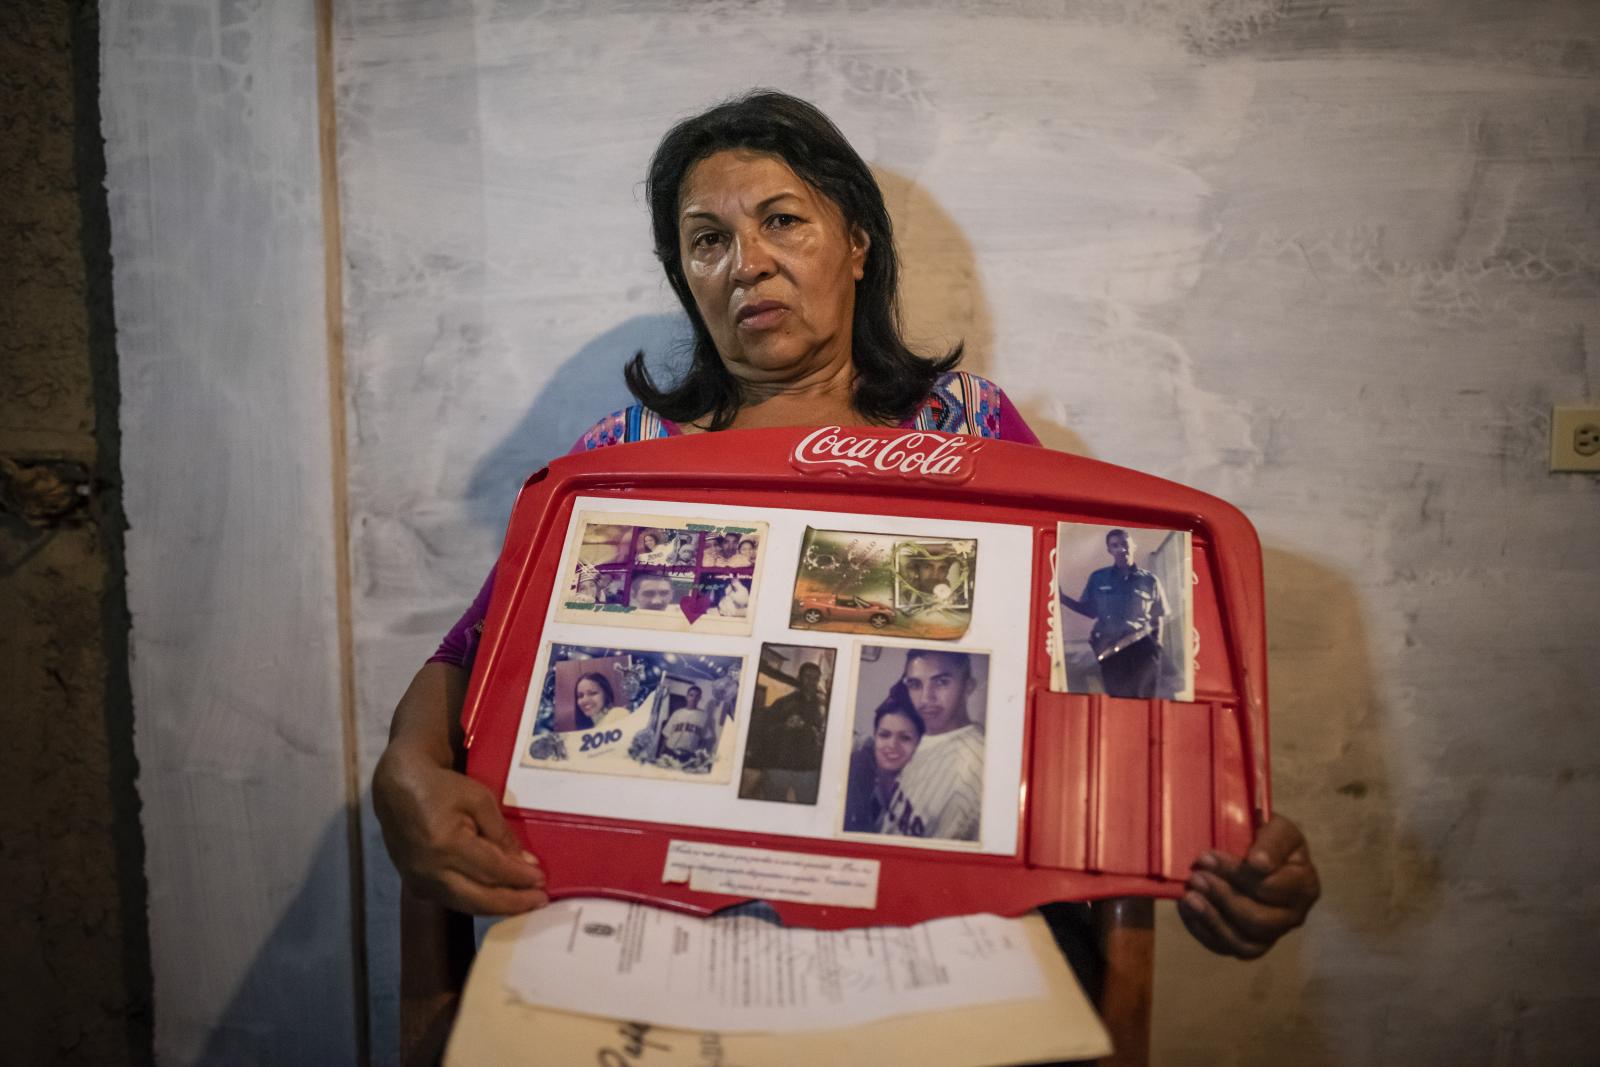 The mother of a murdered young man shows a picture with photographs of her son who was ambushed...